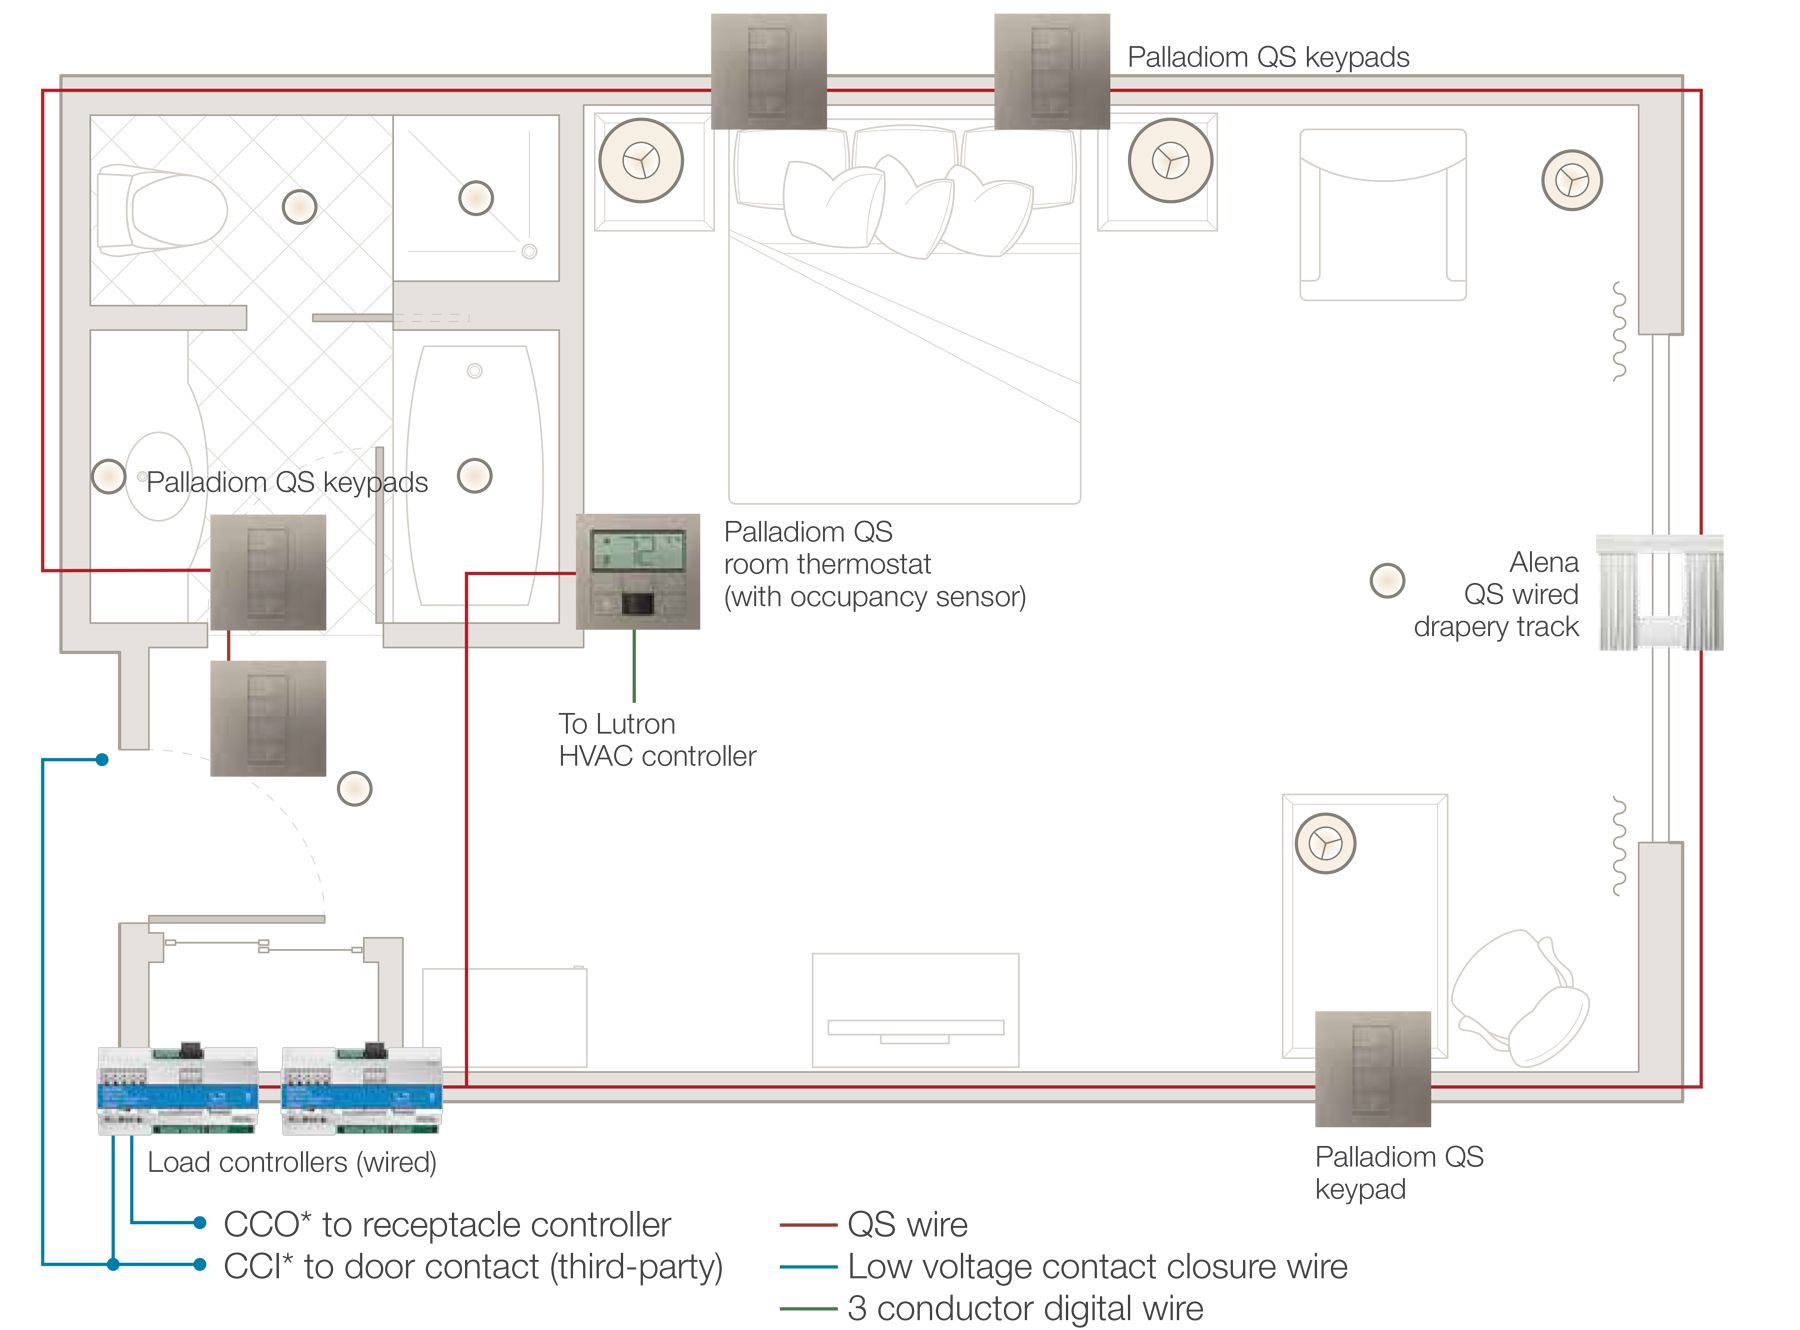 Blueprint of a my room Prime house layout using palladiom qs keypads